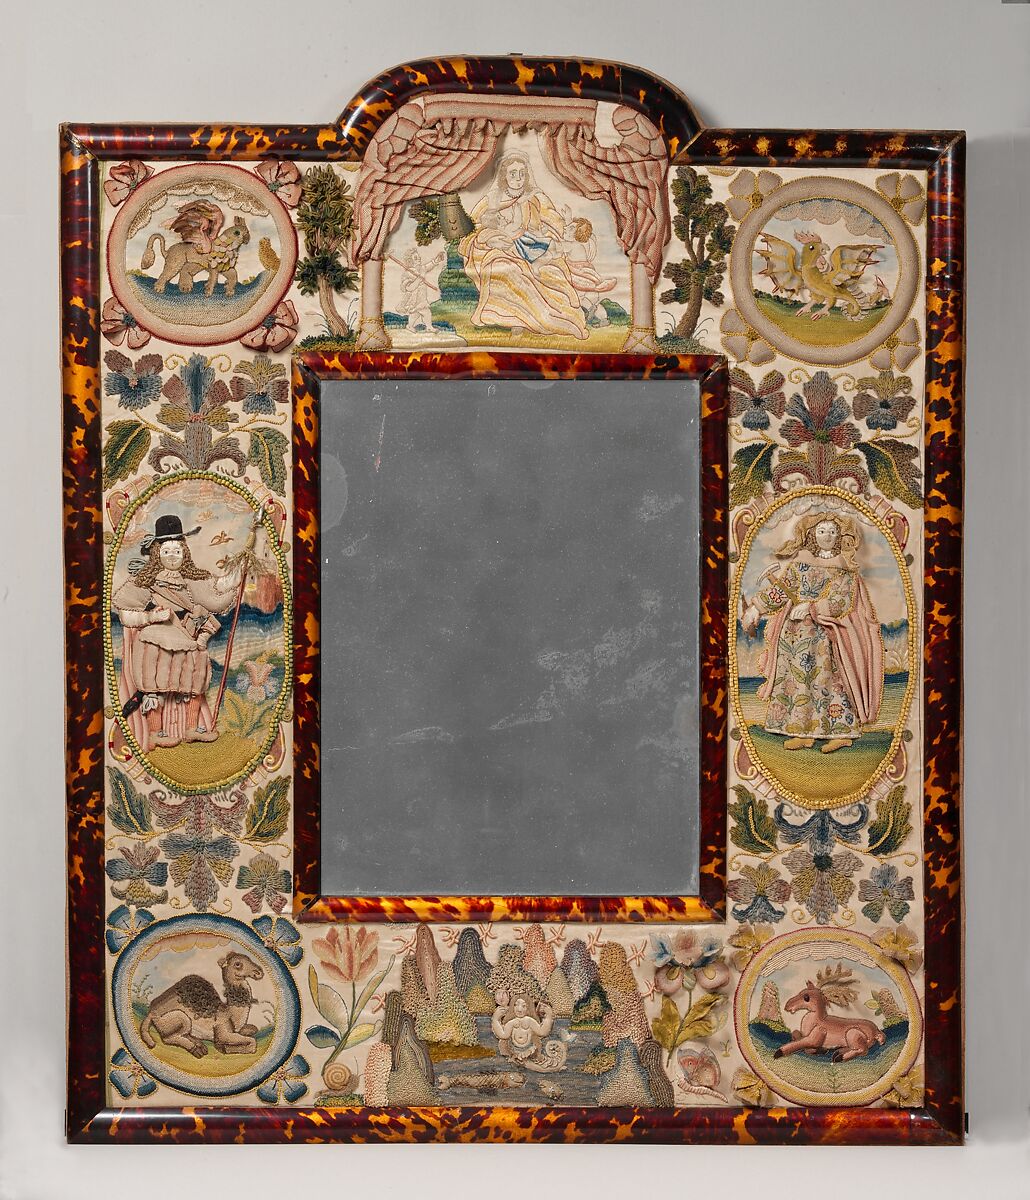 Mirror with Jael and Barak, Satin worked with silk and metal-wrapped thread, beads, purl, mica, seed pearls; detached buttonhole variations, long-and-short, satin, couching, and straight stitches; wood frame, celluloid imitation tortoiseshell, mirror glass, silk plush, British 